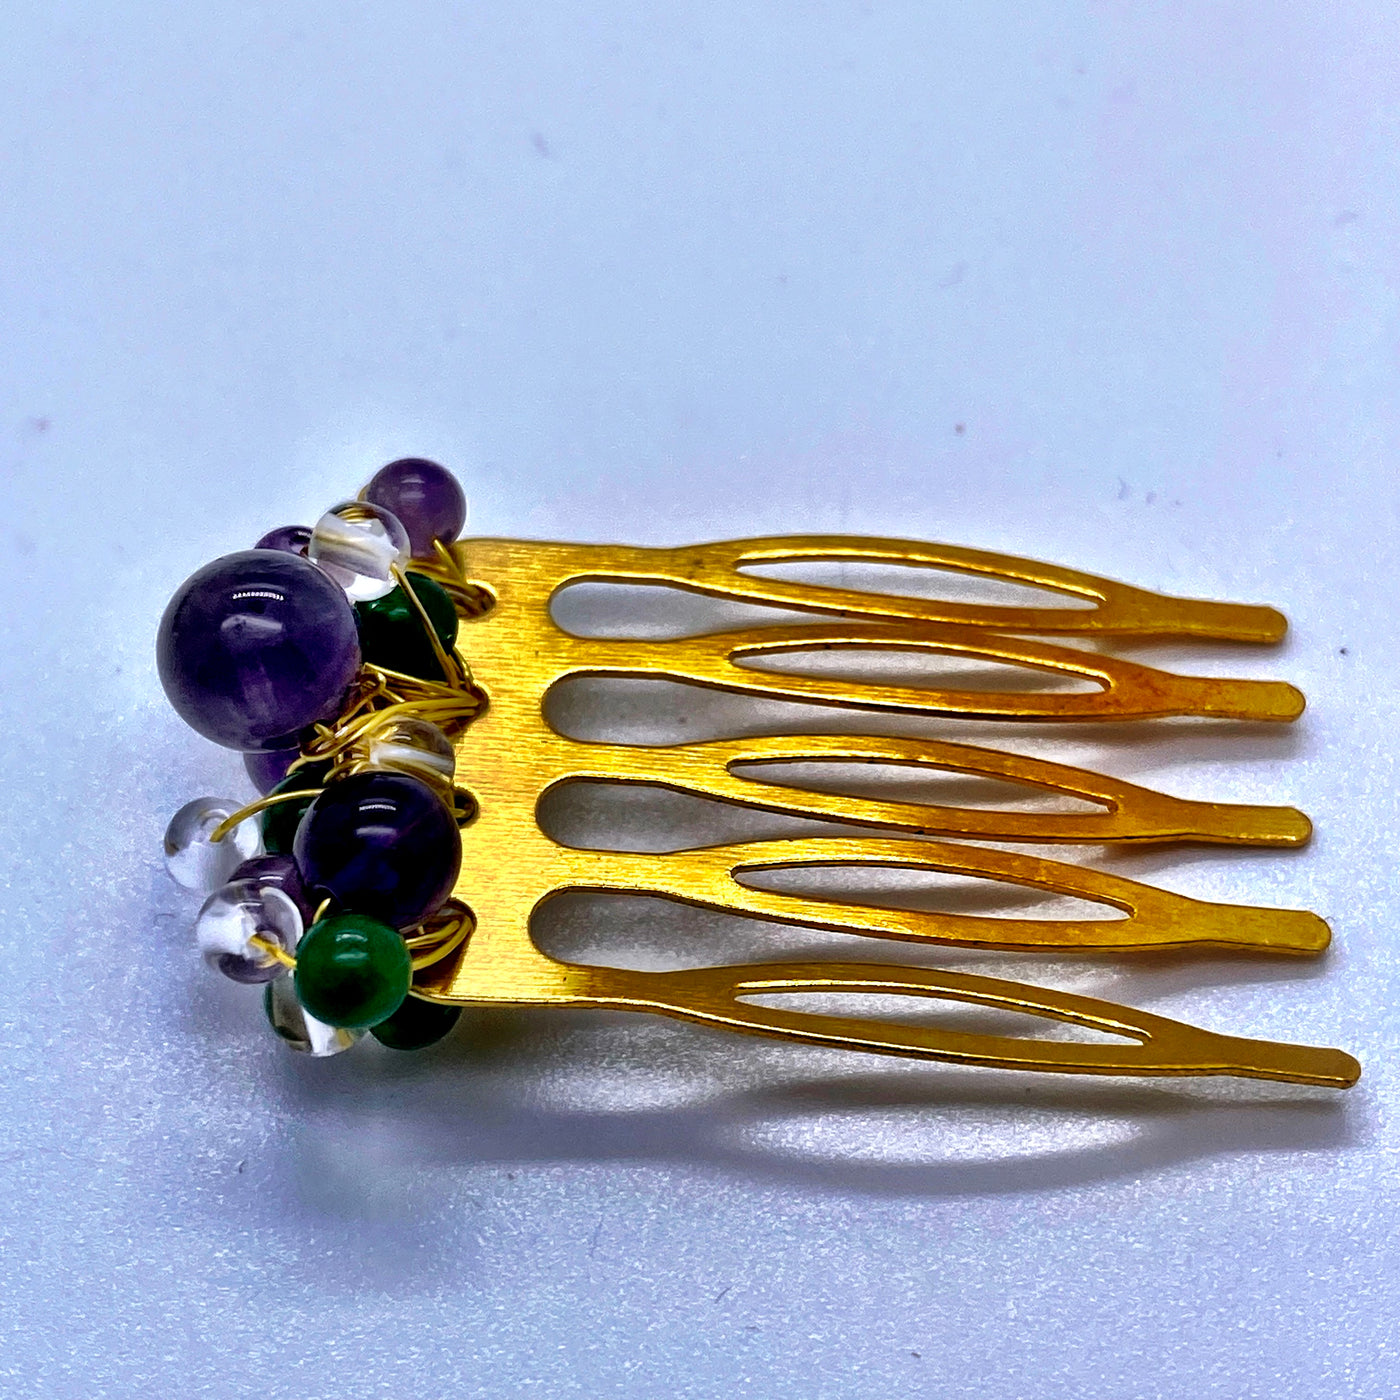 Green calchedony, amethysts, opales, golden wire and white quartz crystals for this hair combs simple tuck five teeth metal combs gold color